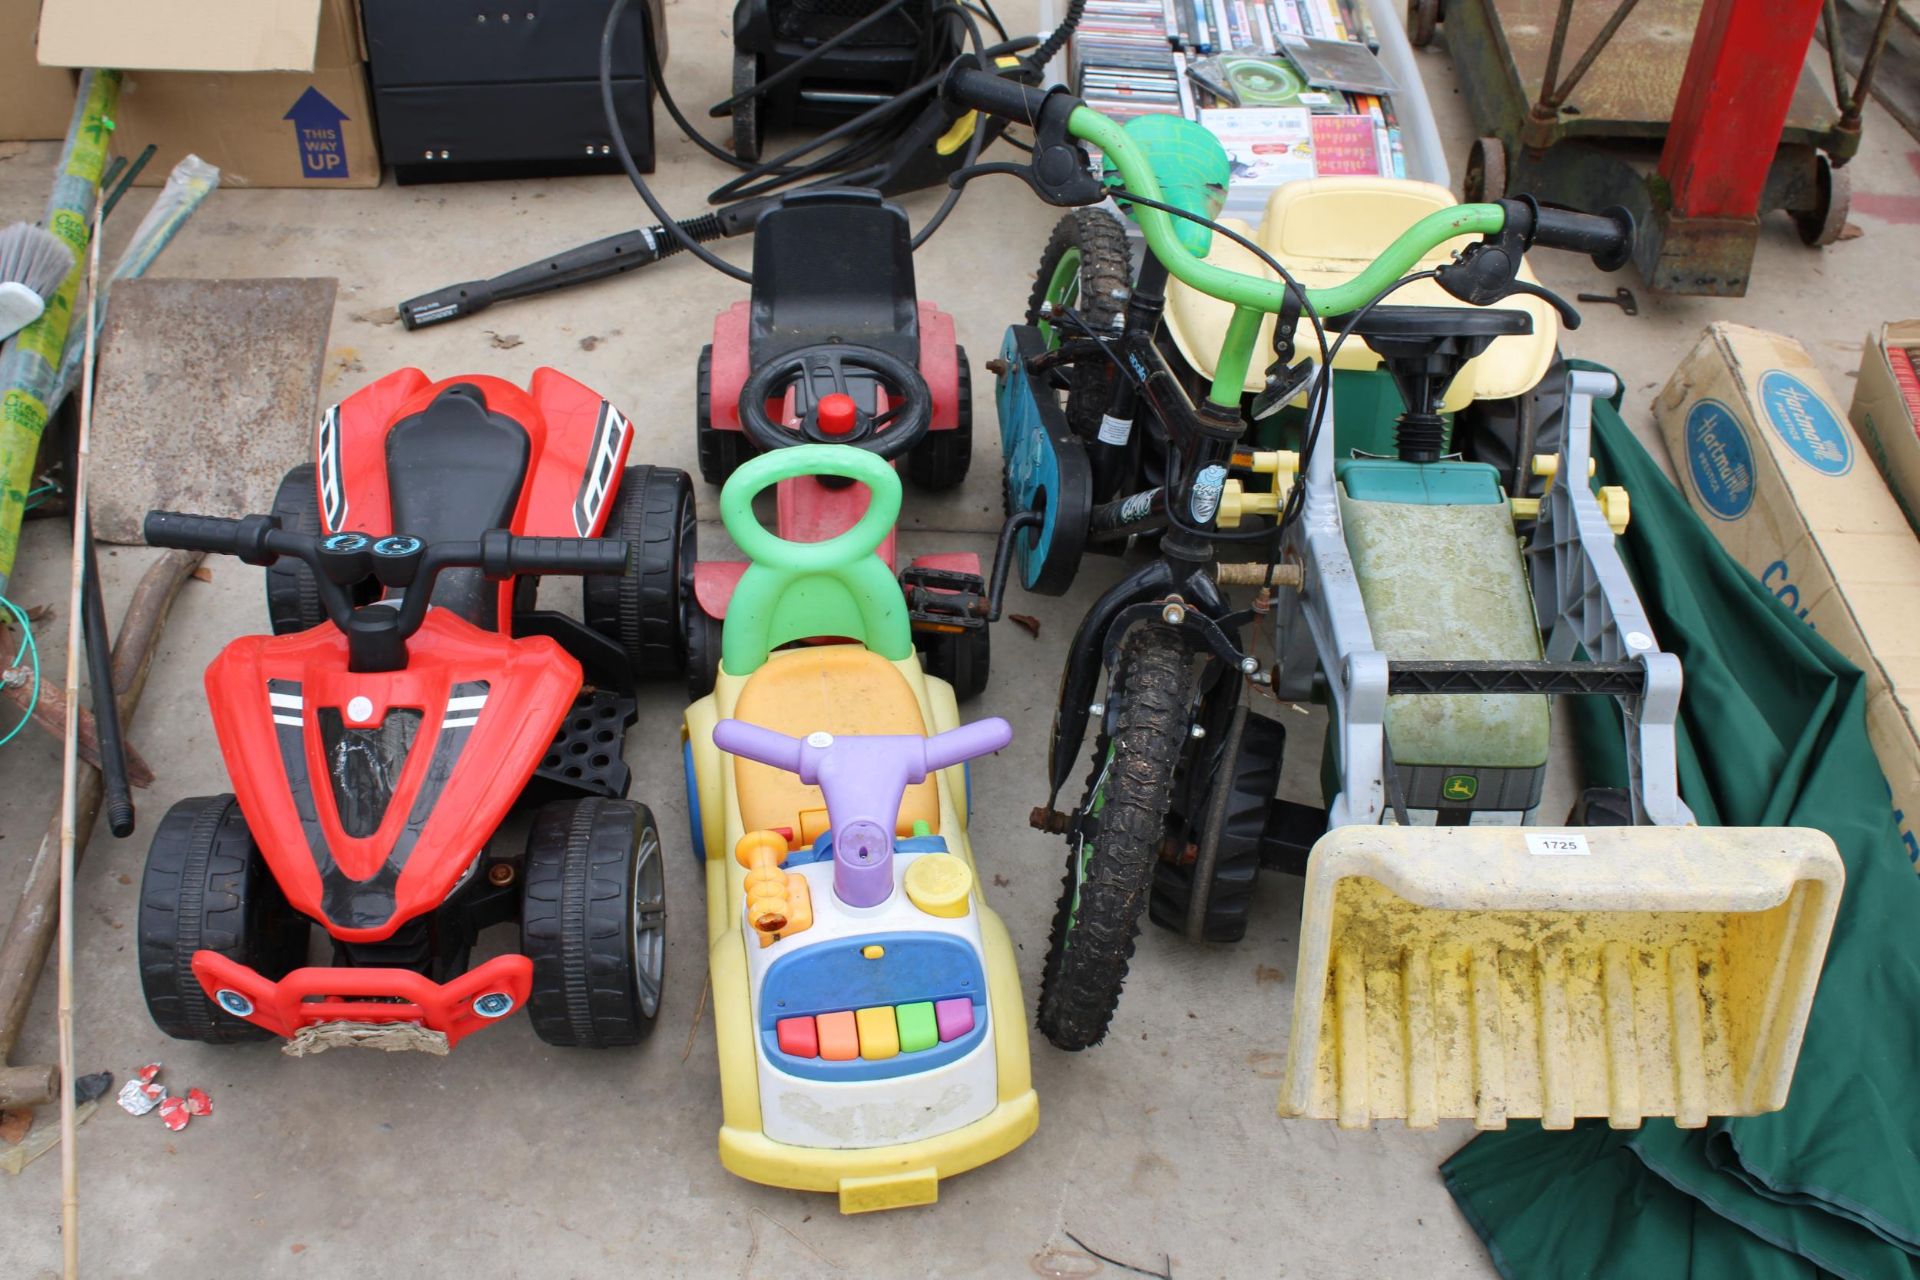 AN ASSORTMENT OF CHILDRENS TOYS TO INCLUDE A JOHN DEERE PEDAL TRACTOR, AN ELECTRIC QUAD BIKE AND A